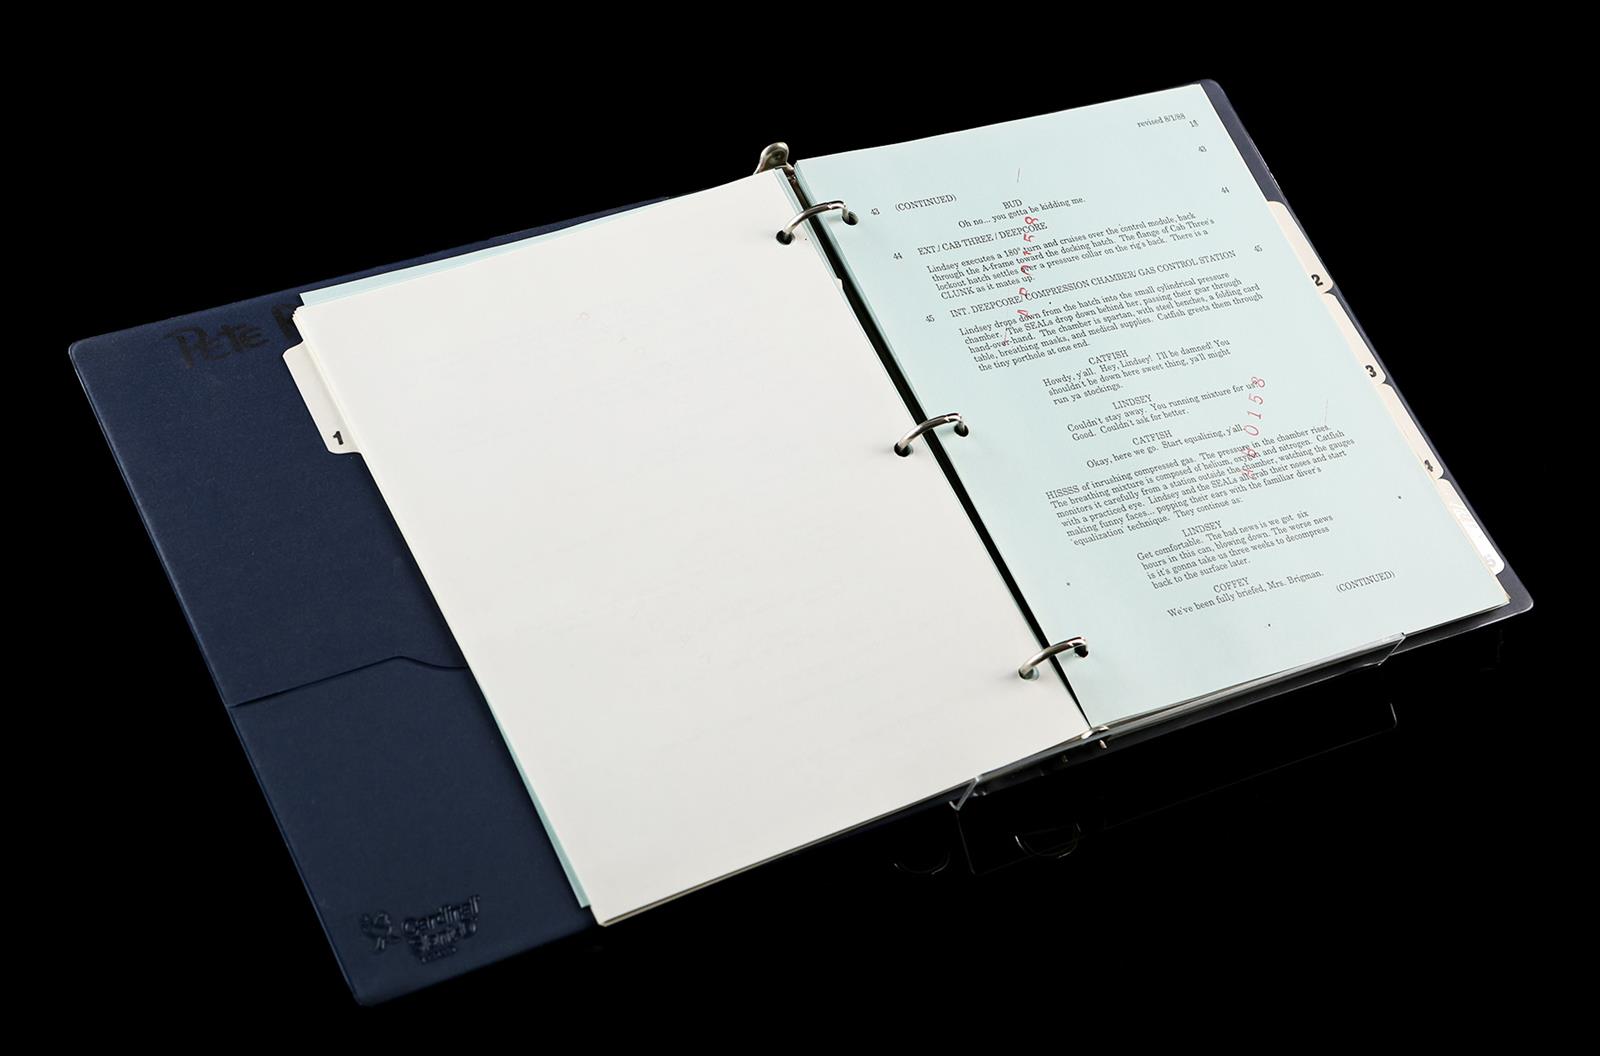 THE ABYSS (1989) - Script Binder and Underwater Slate A script binder and underwater slate from - Image 2 of 12